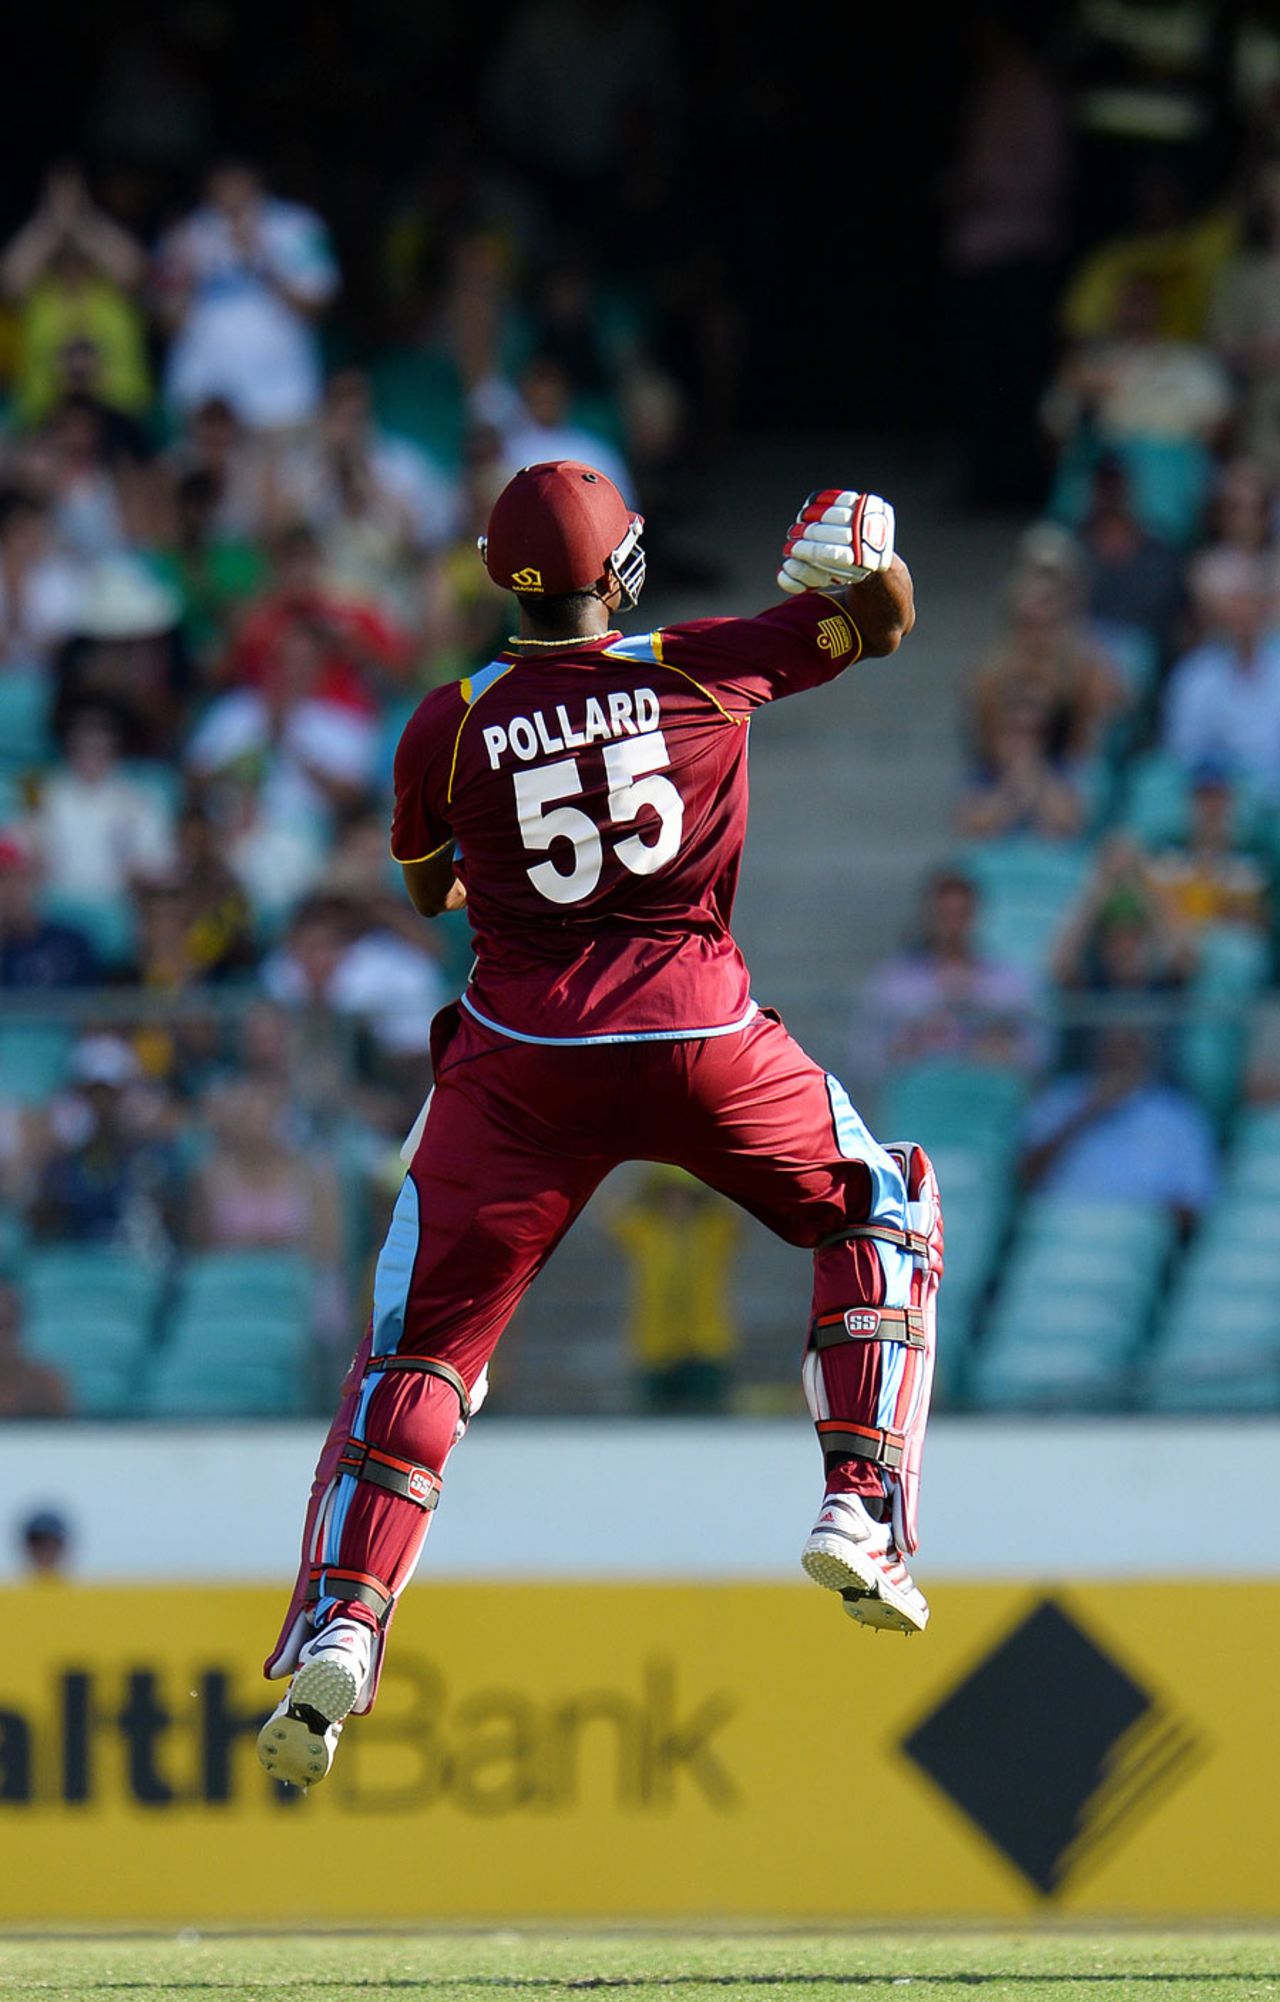 Kieron Pollard is ecstatic after completing his hundred, Australia v West Indies, 4th ODI, Sydney, February 8, 2013